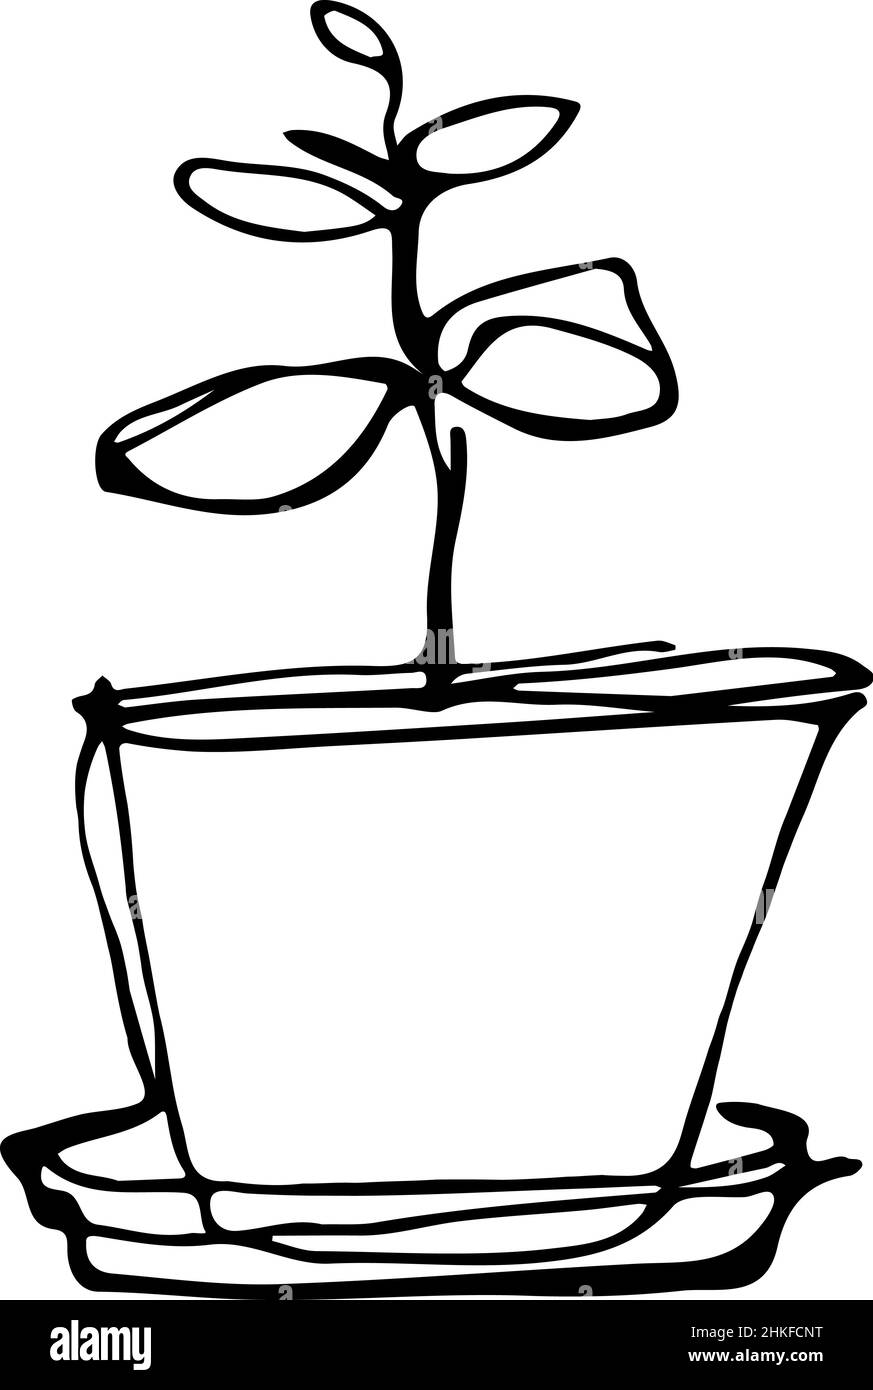 black and white sketch flower room in a flowerpot Stock Photo